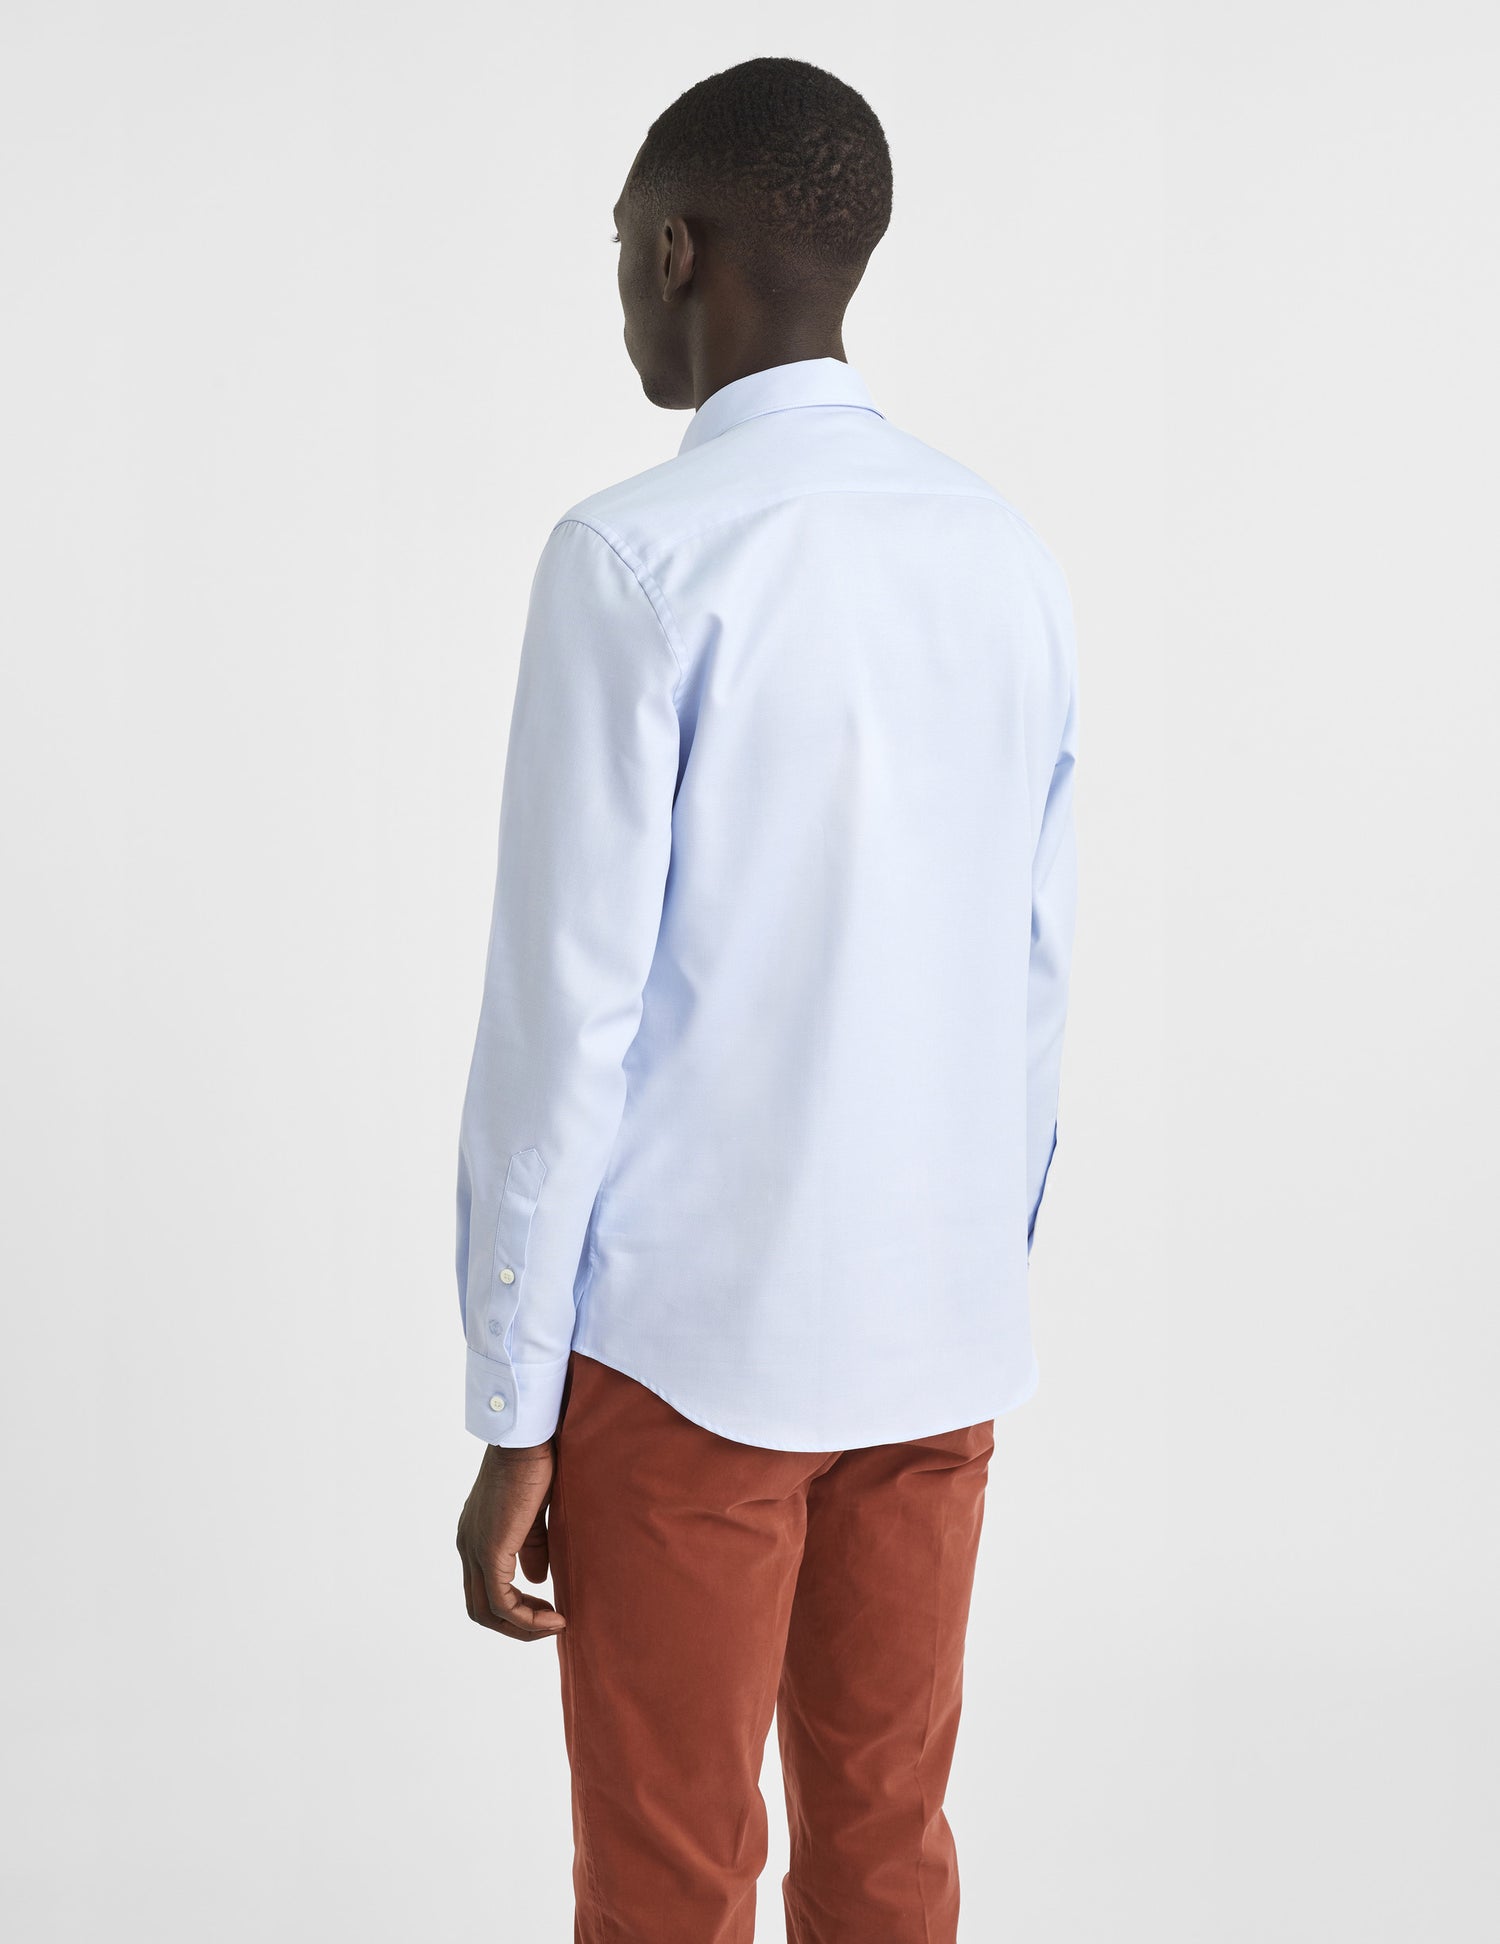 Semi-fitted blue shirt - Shaped - Figaret Collar#4